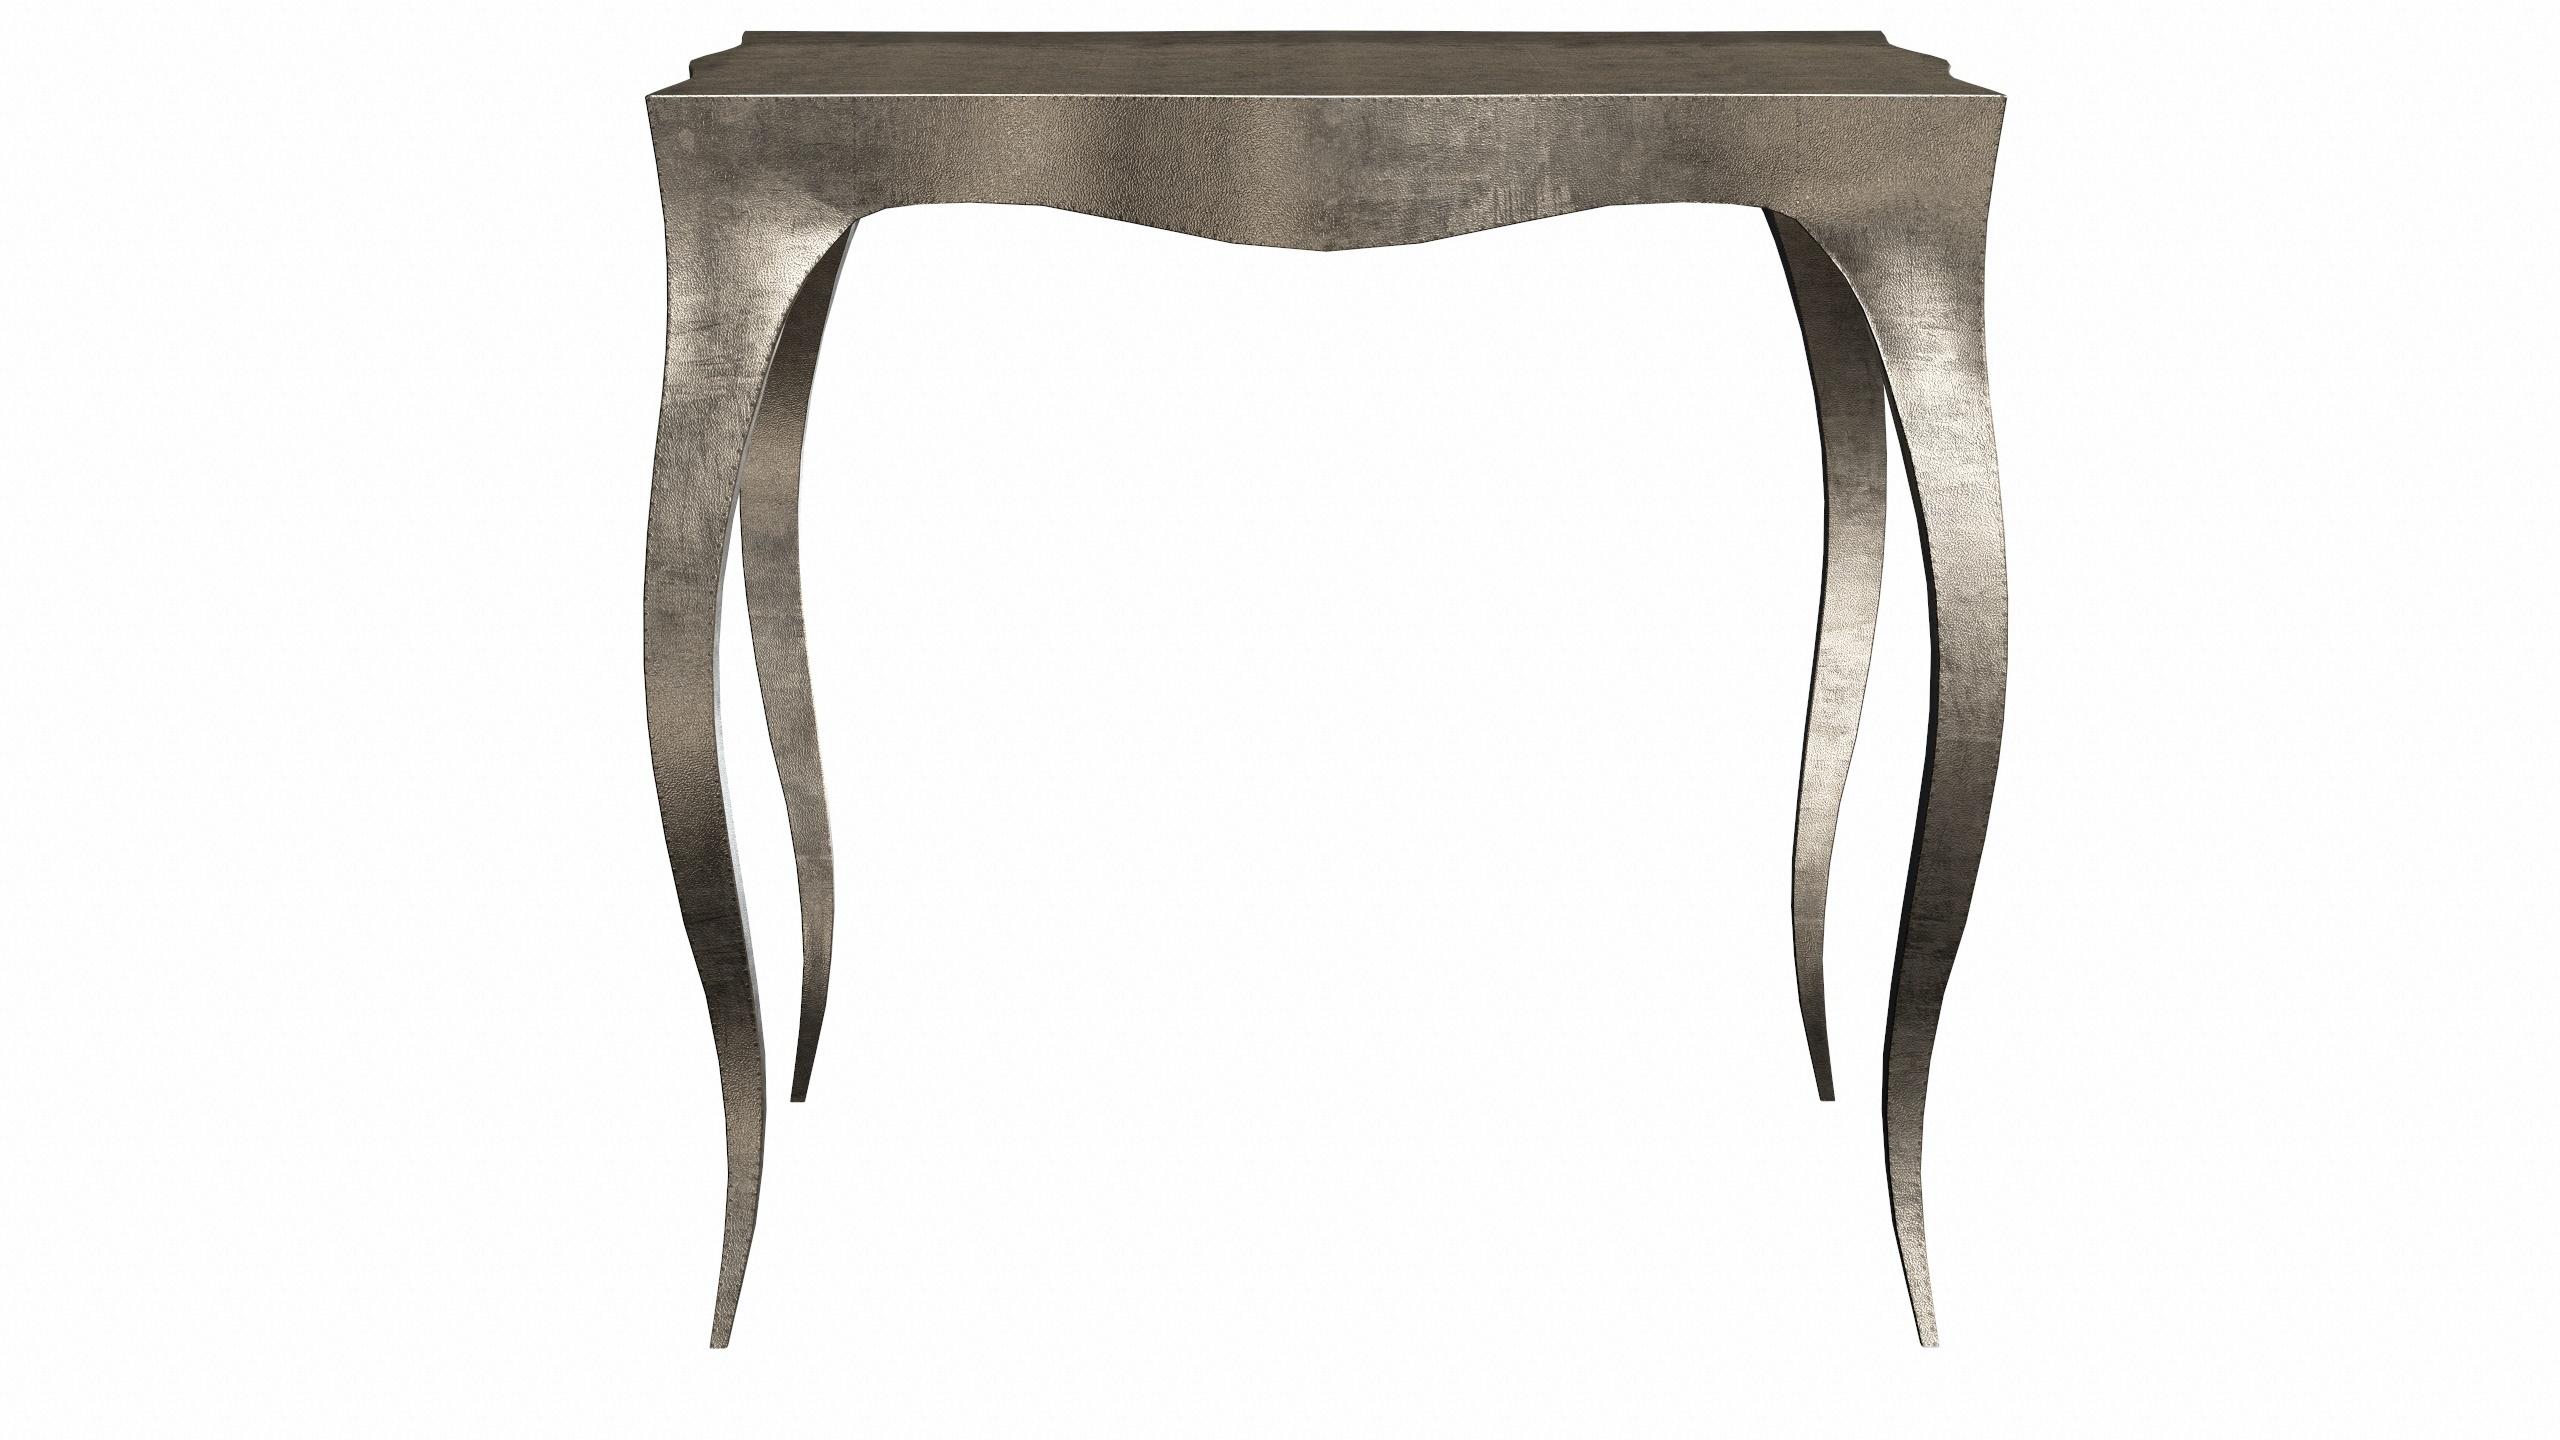 Hand-Carved Louise Art Deco Nesting Tables and Crad Tables in Fine Hammered Antique by Paul For Sale